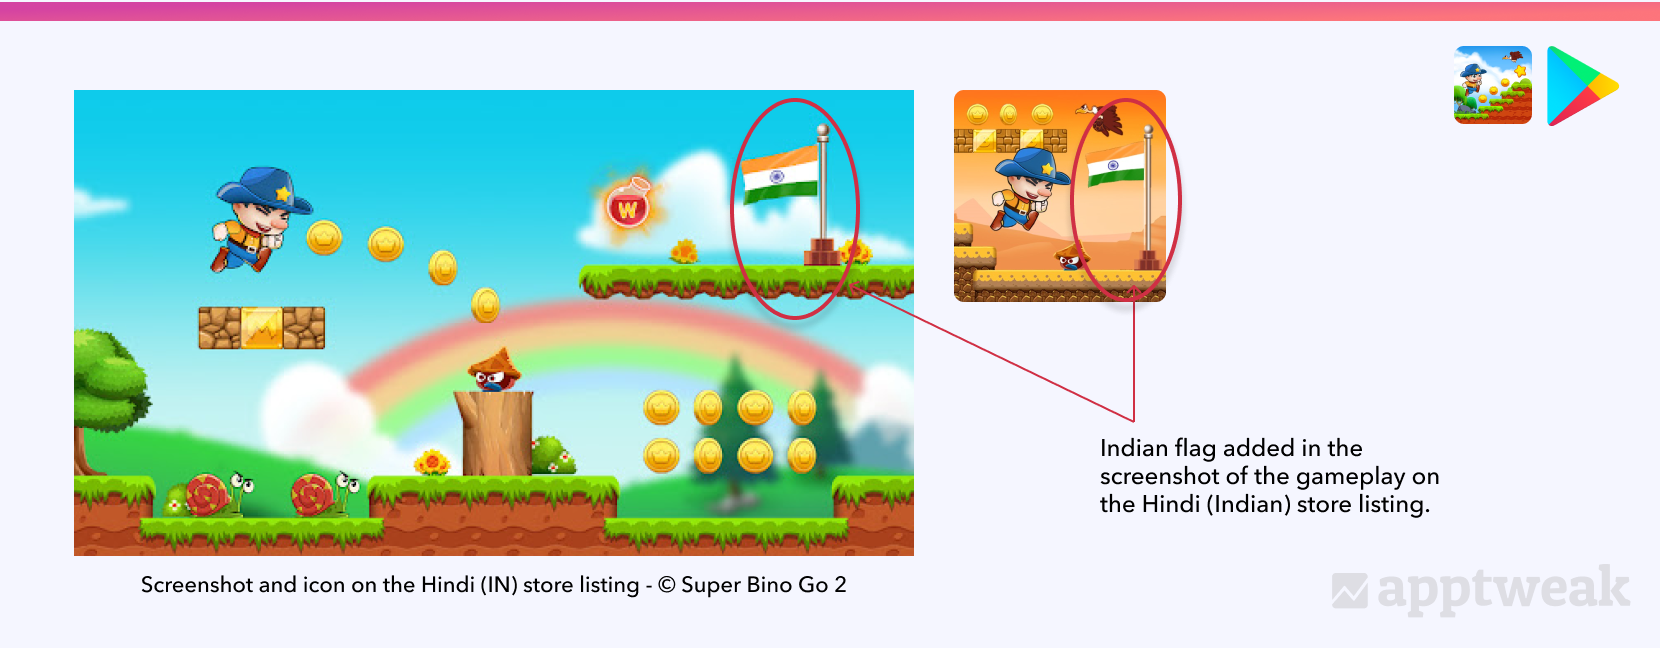 Super Bingo Go 2 visuals including an Indian flag on its Hindi store listing